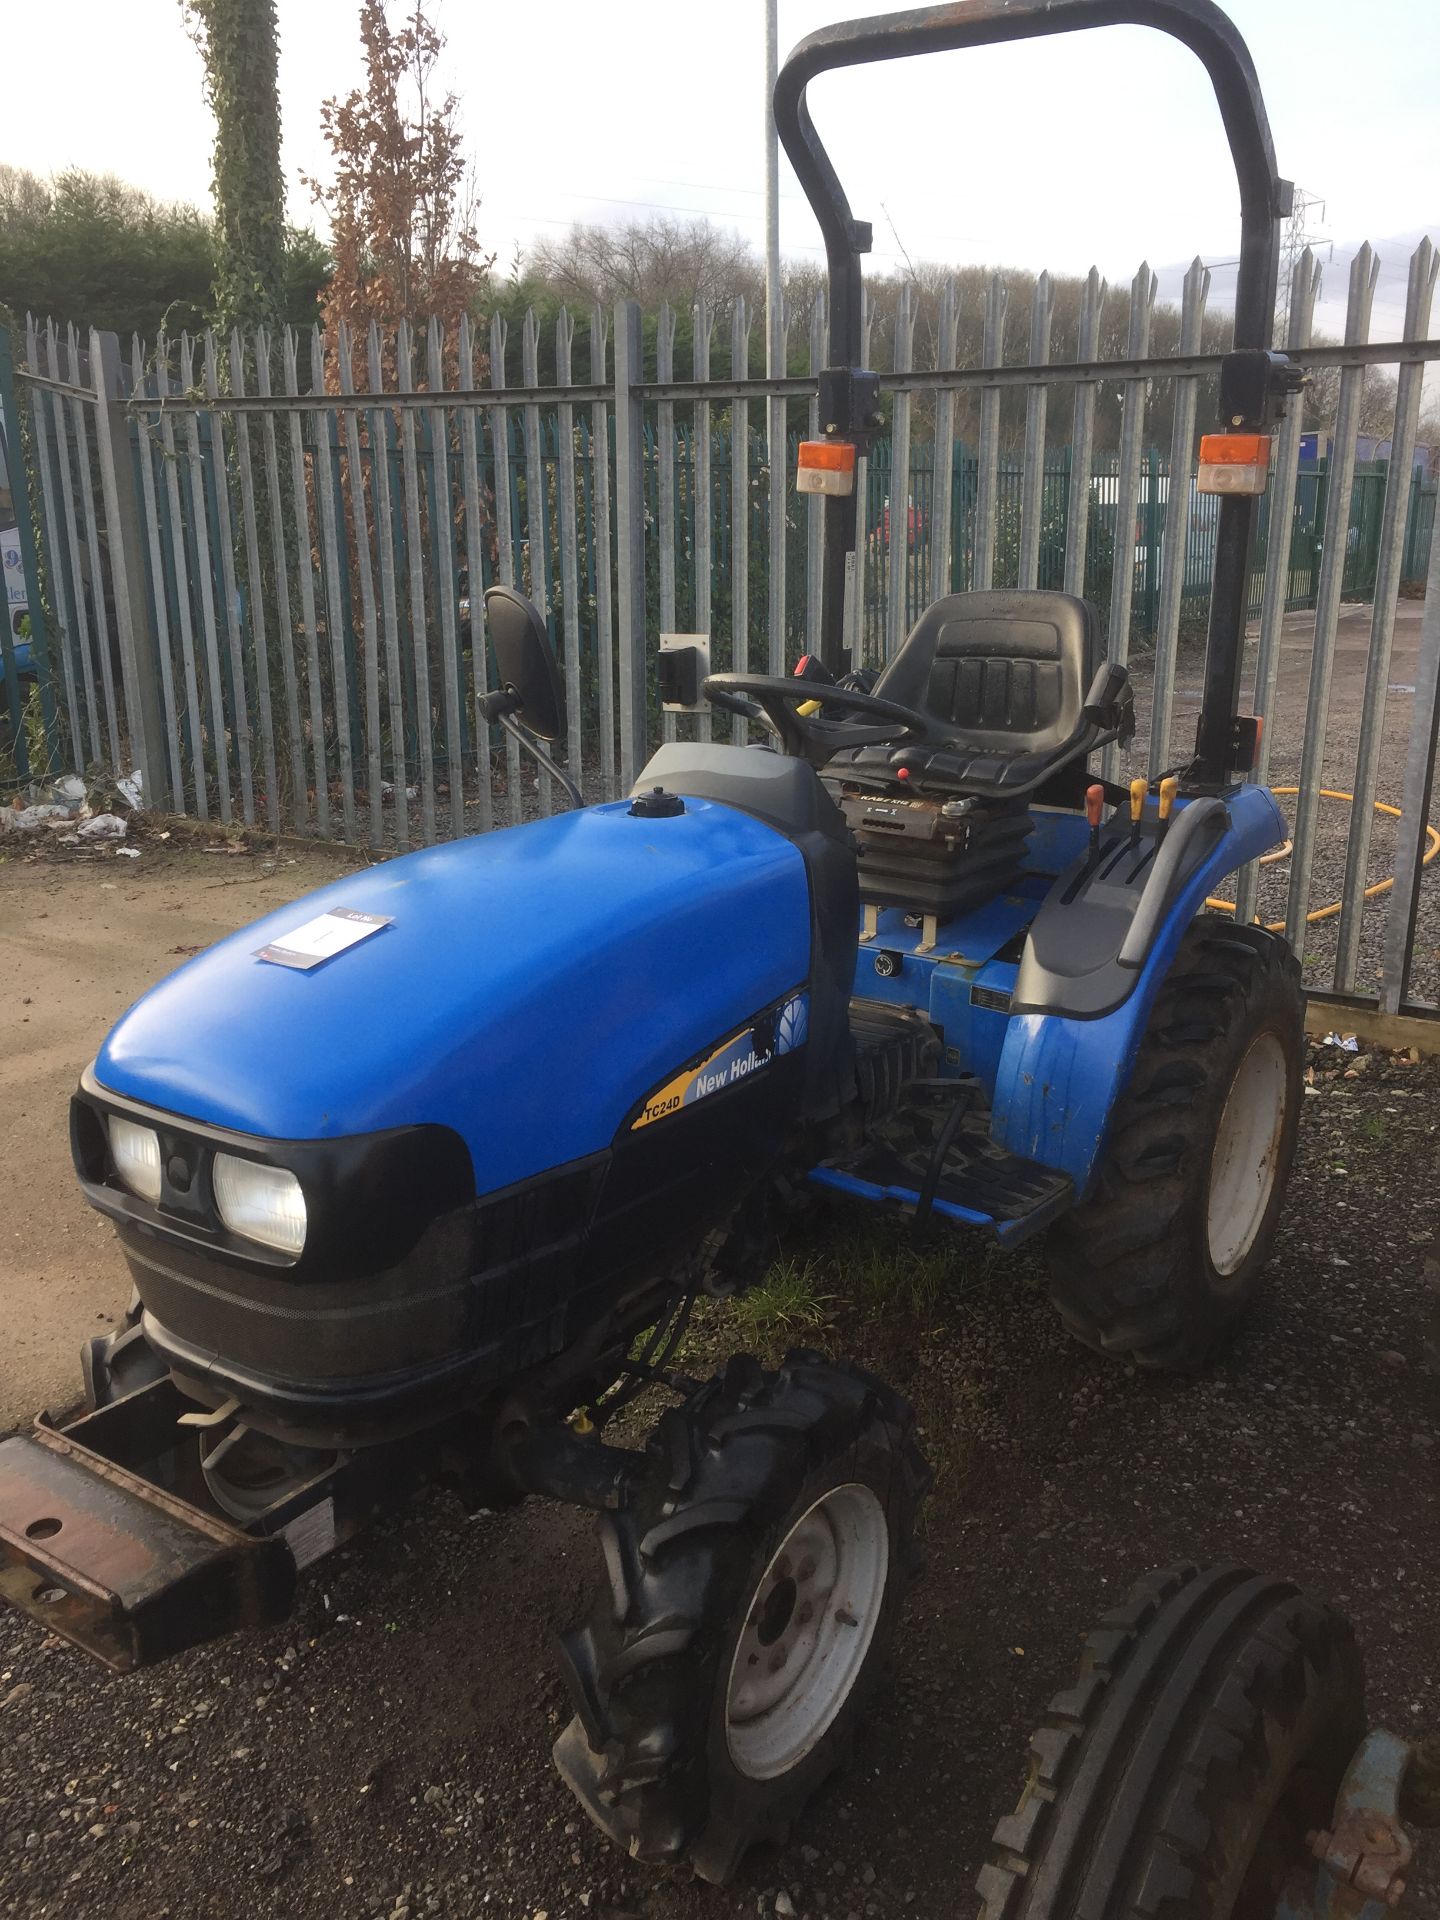 New Holland TC24D 4wd mini tractor,Registration No. VX07 DPK (2007) Hours: 1538 - Image 2 of 3